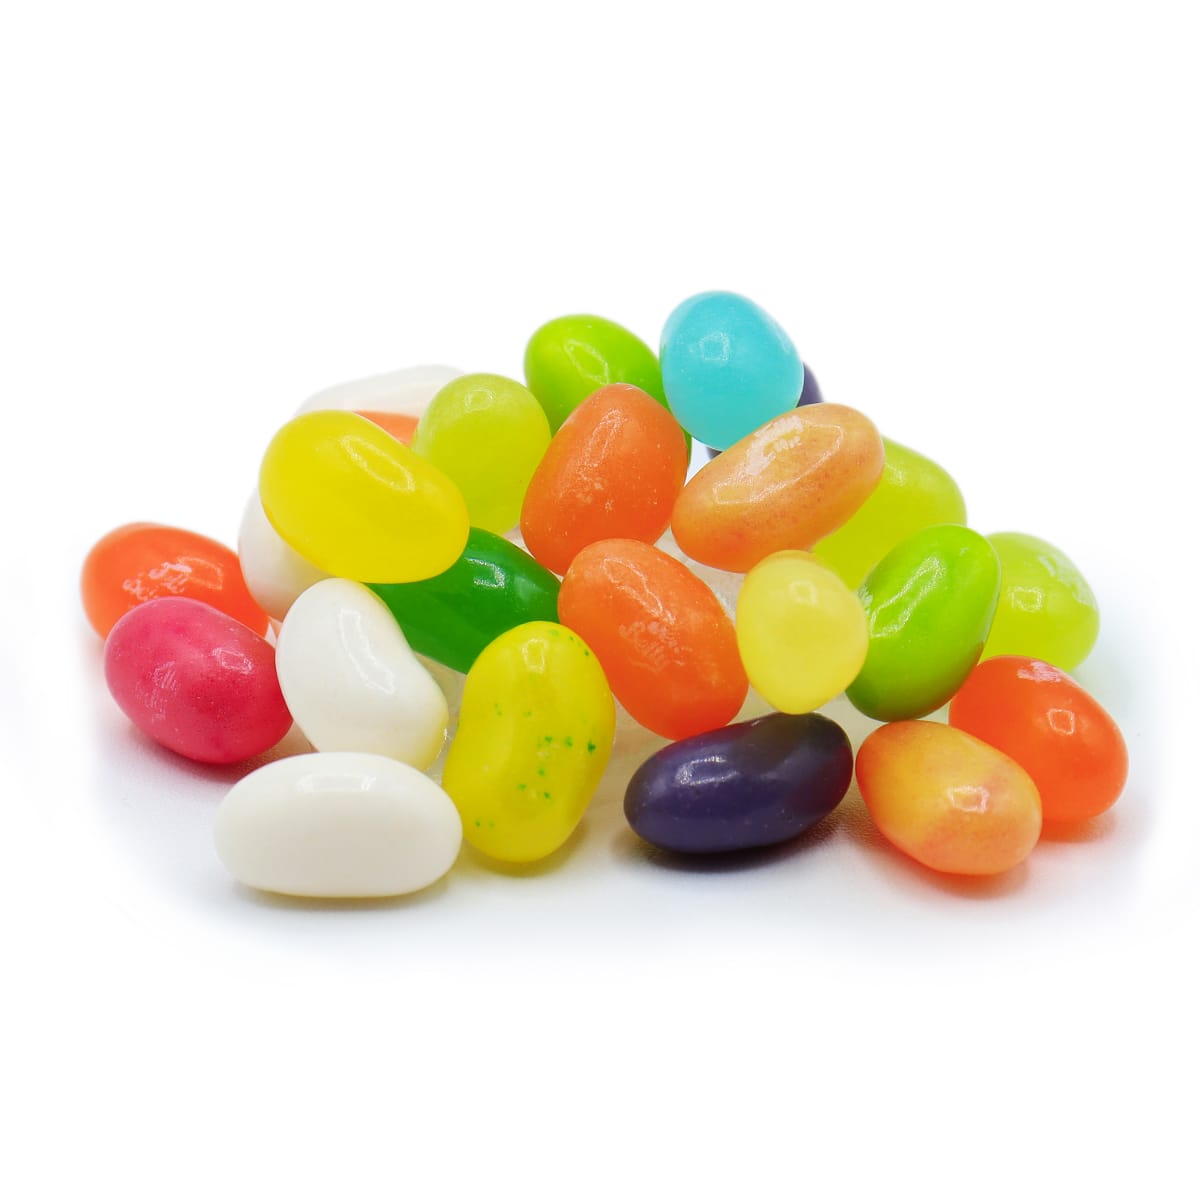 Beans)　Jelly　(Jelly　Belly,　Tropical